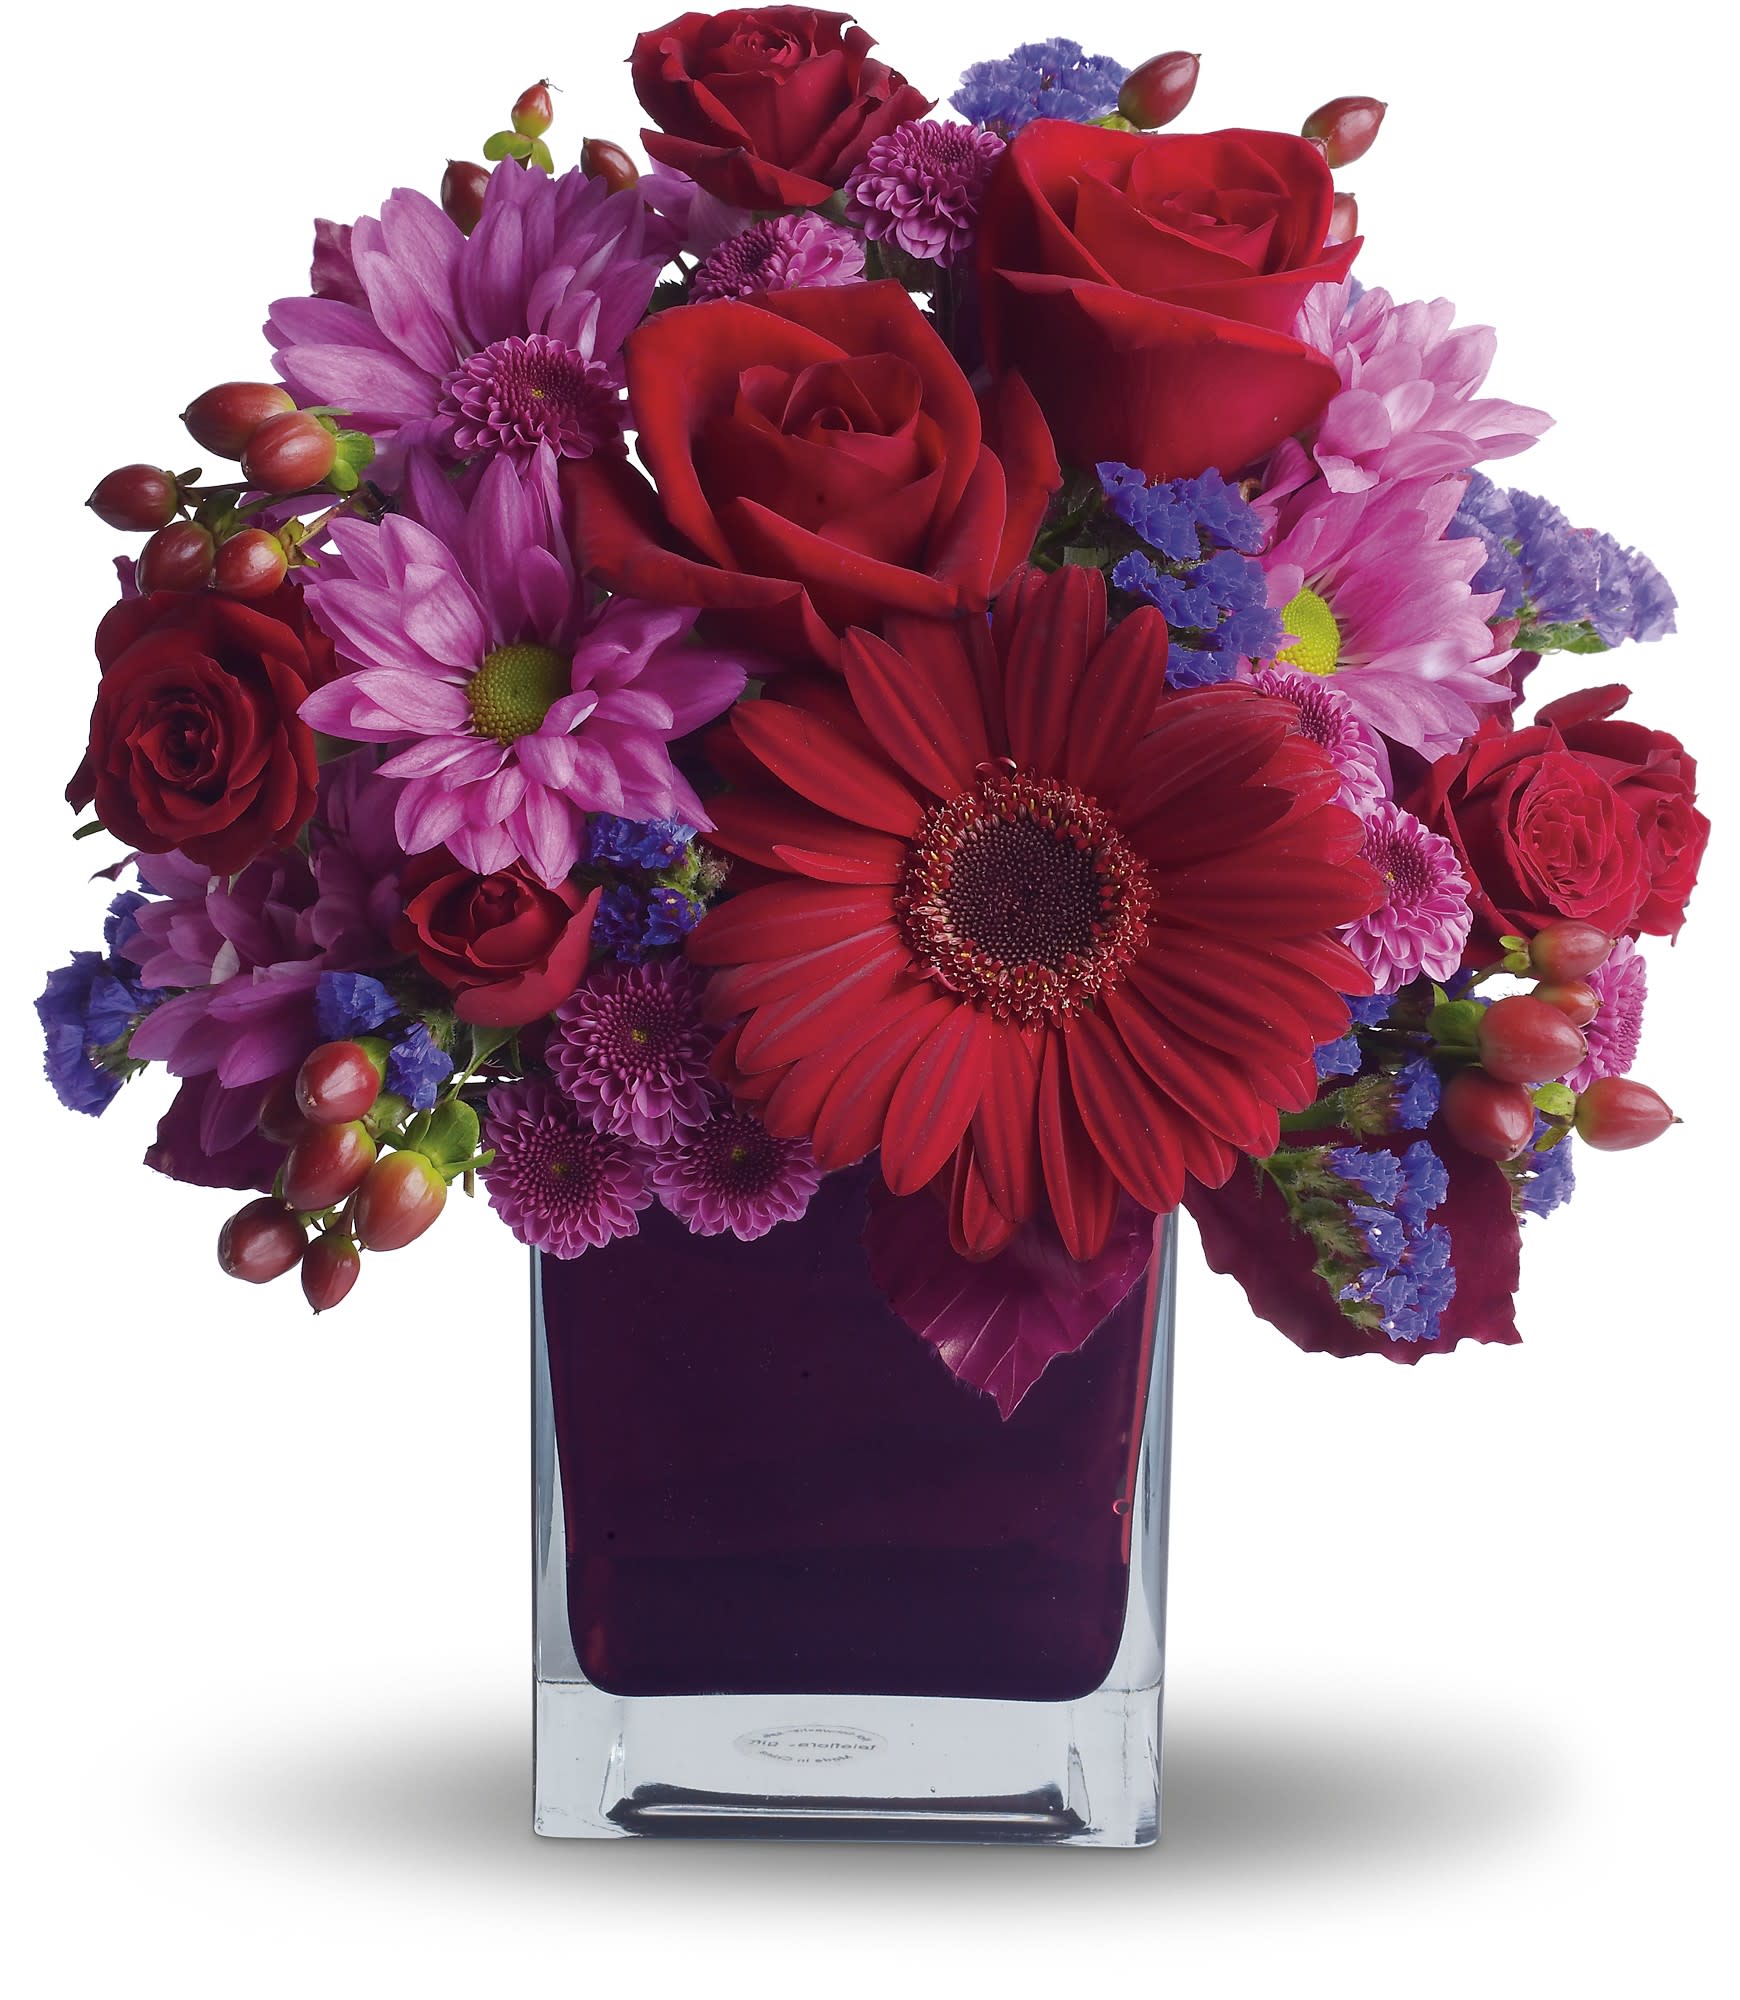 It's My Party by Teleflora - The only crying that this plum party arrangement might inspire are tears of joy! So fabulous. So fun. So fall with its jewel-toned modern cube that's chock full of gorgeous red, purple and perfect flowers.